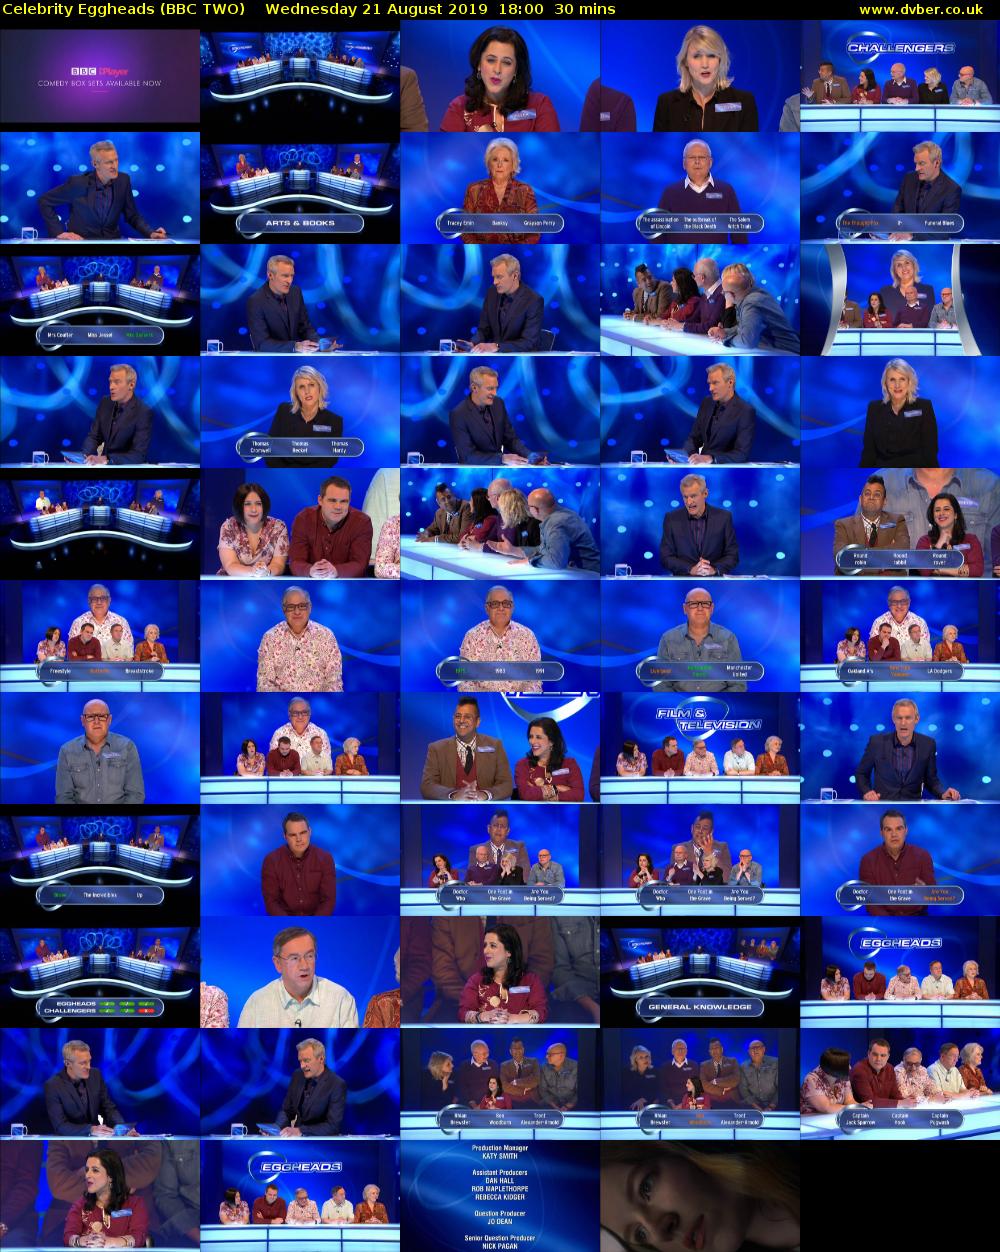 Celebrity Eggheads (BBC TWO) Wednesday 21 August 2019 18:00 - 18:30